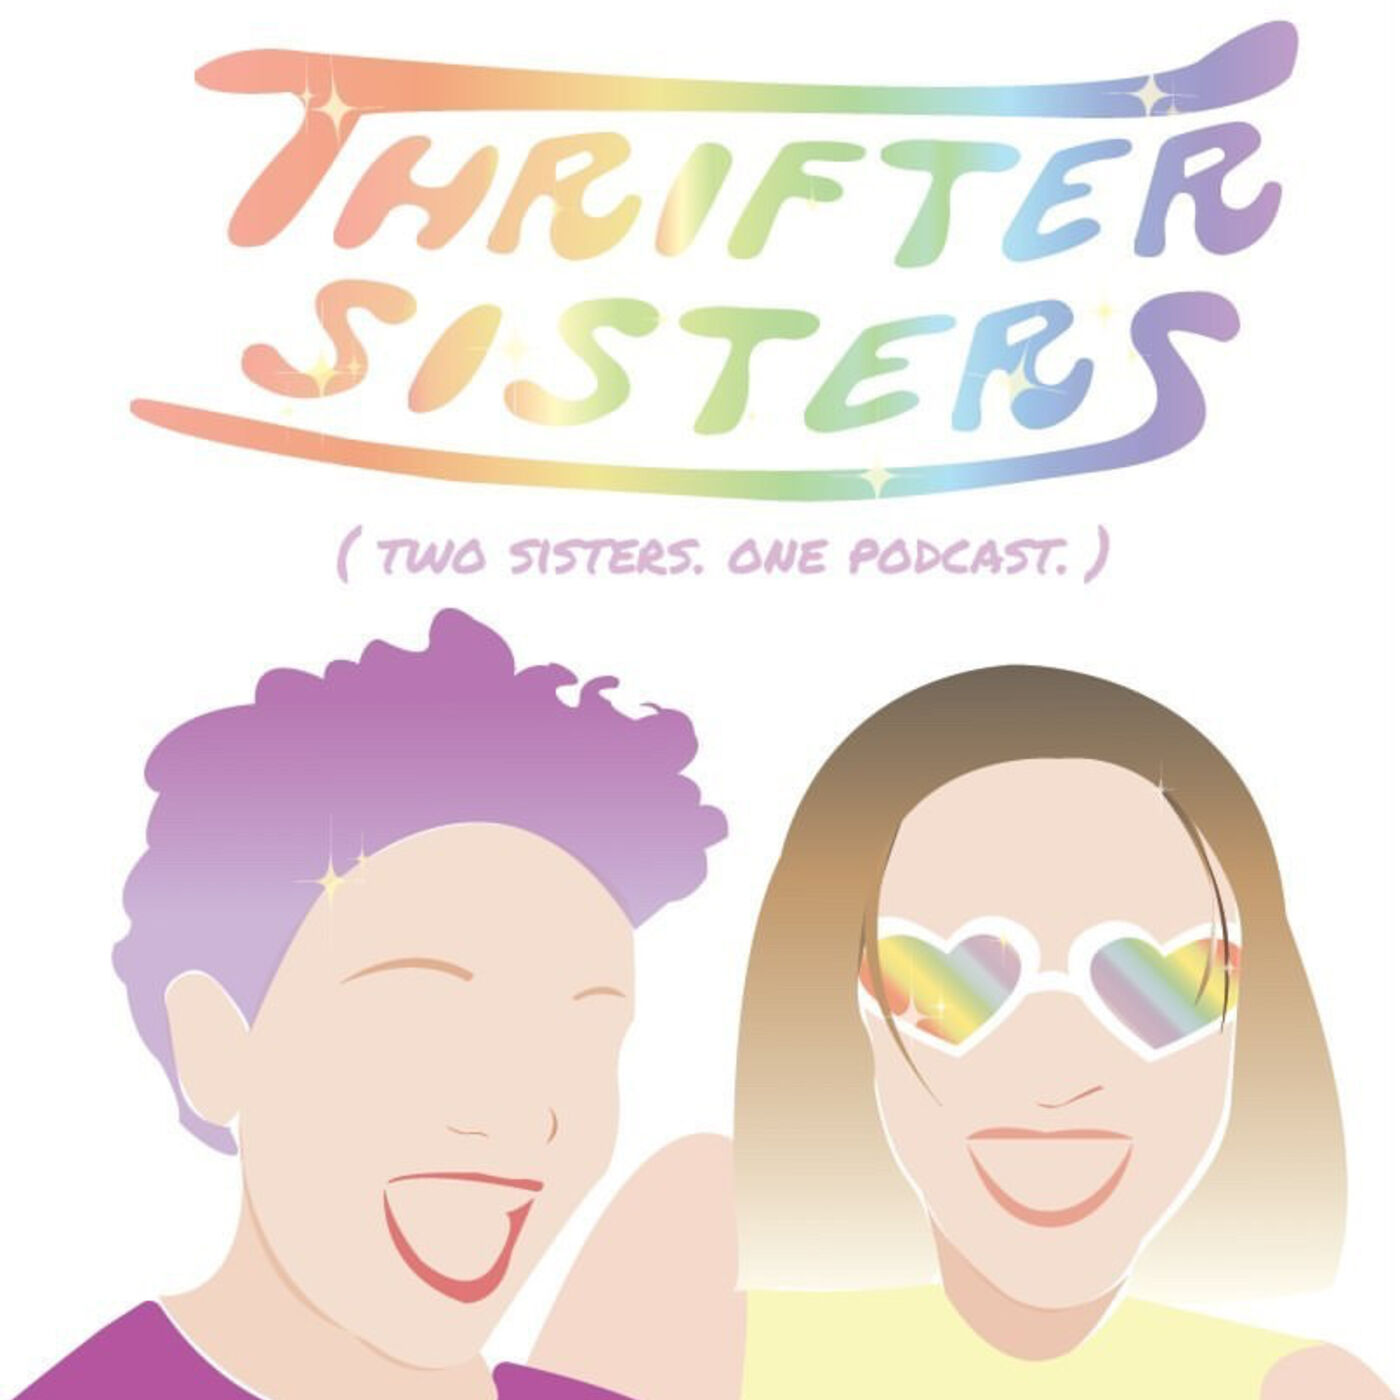 Where are the Thrifter Sisters?